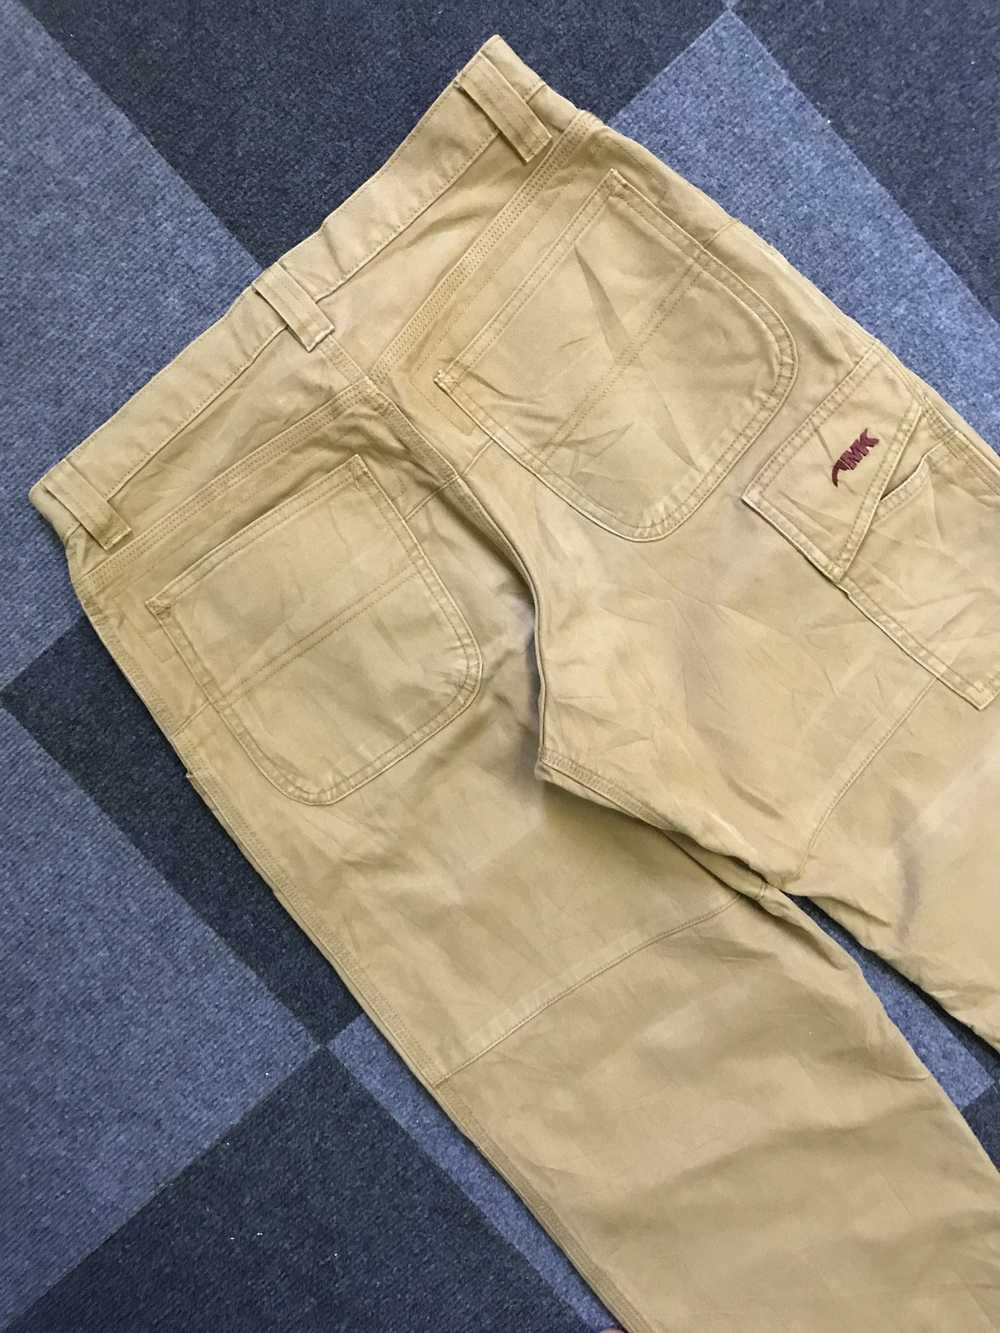 Outdoor Life CP262 MOUNTAIN KHAKIS Sturdy Duck Ca… - image 8